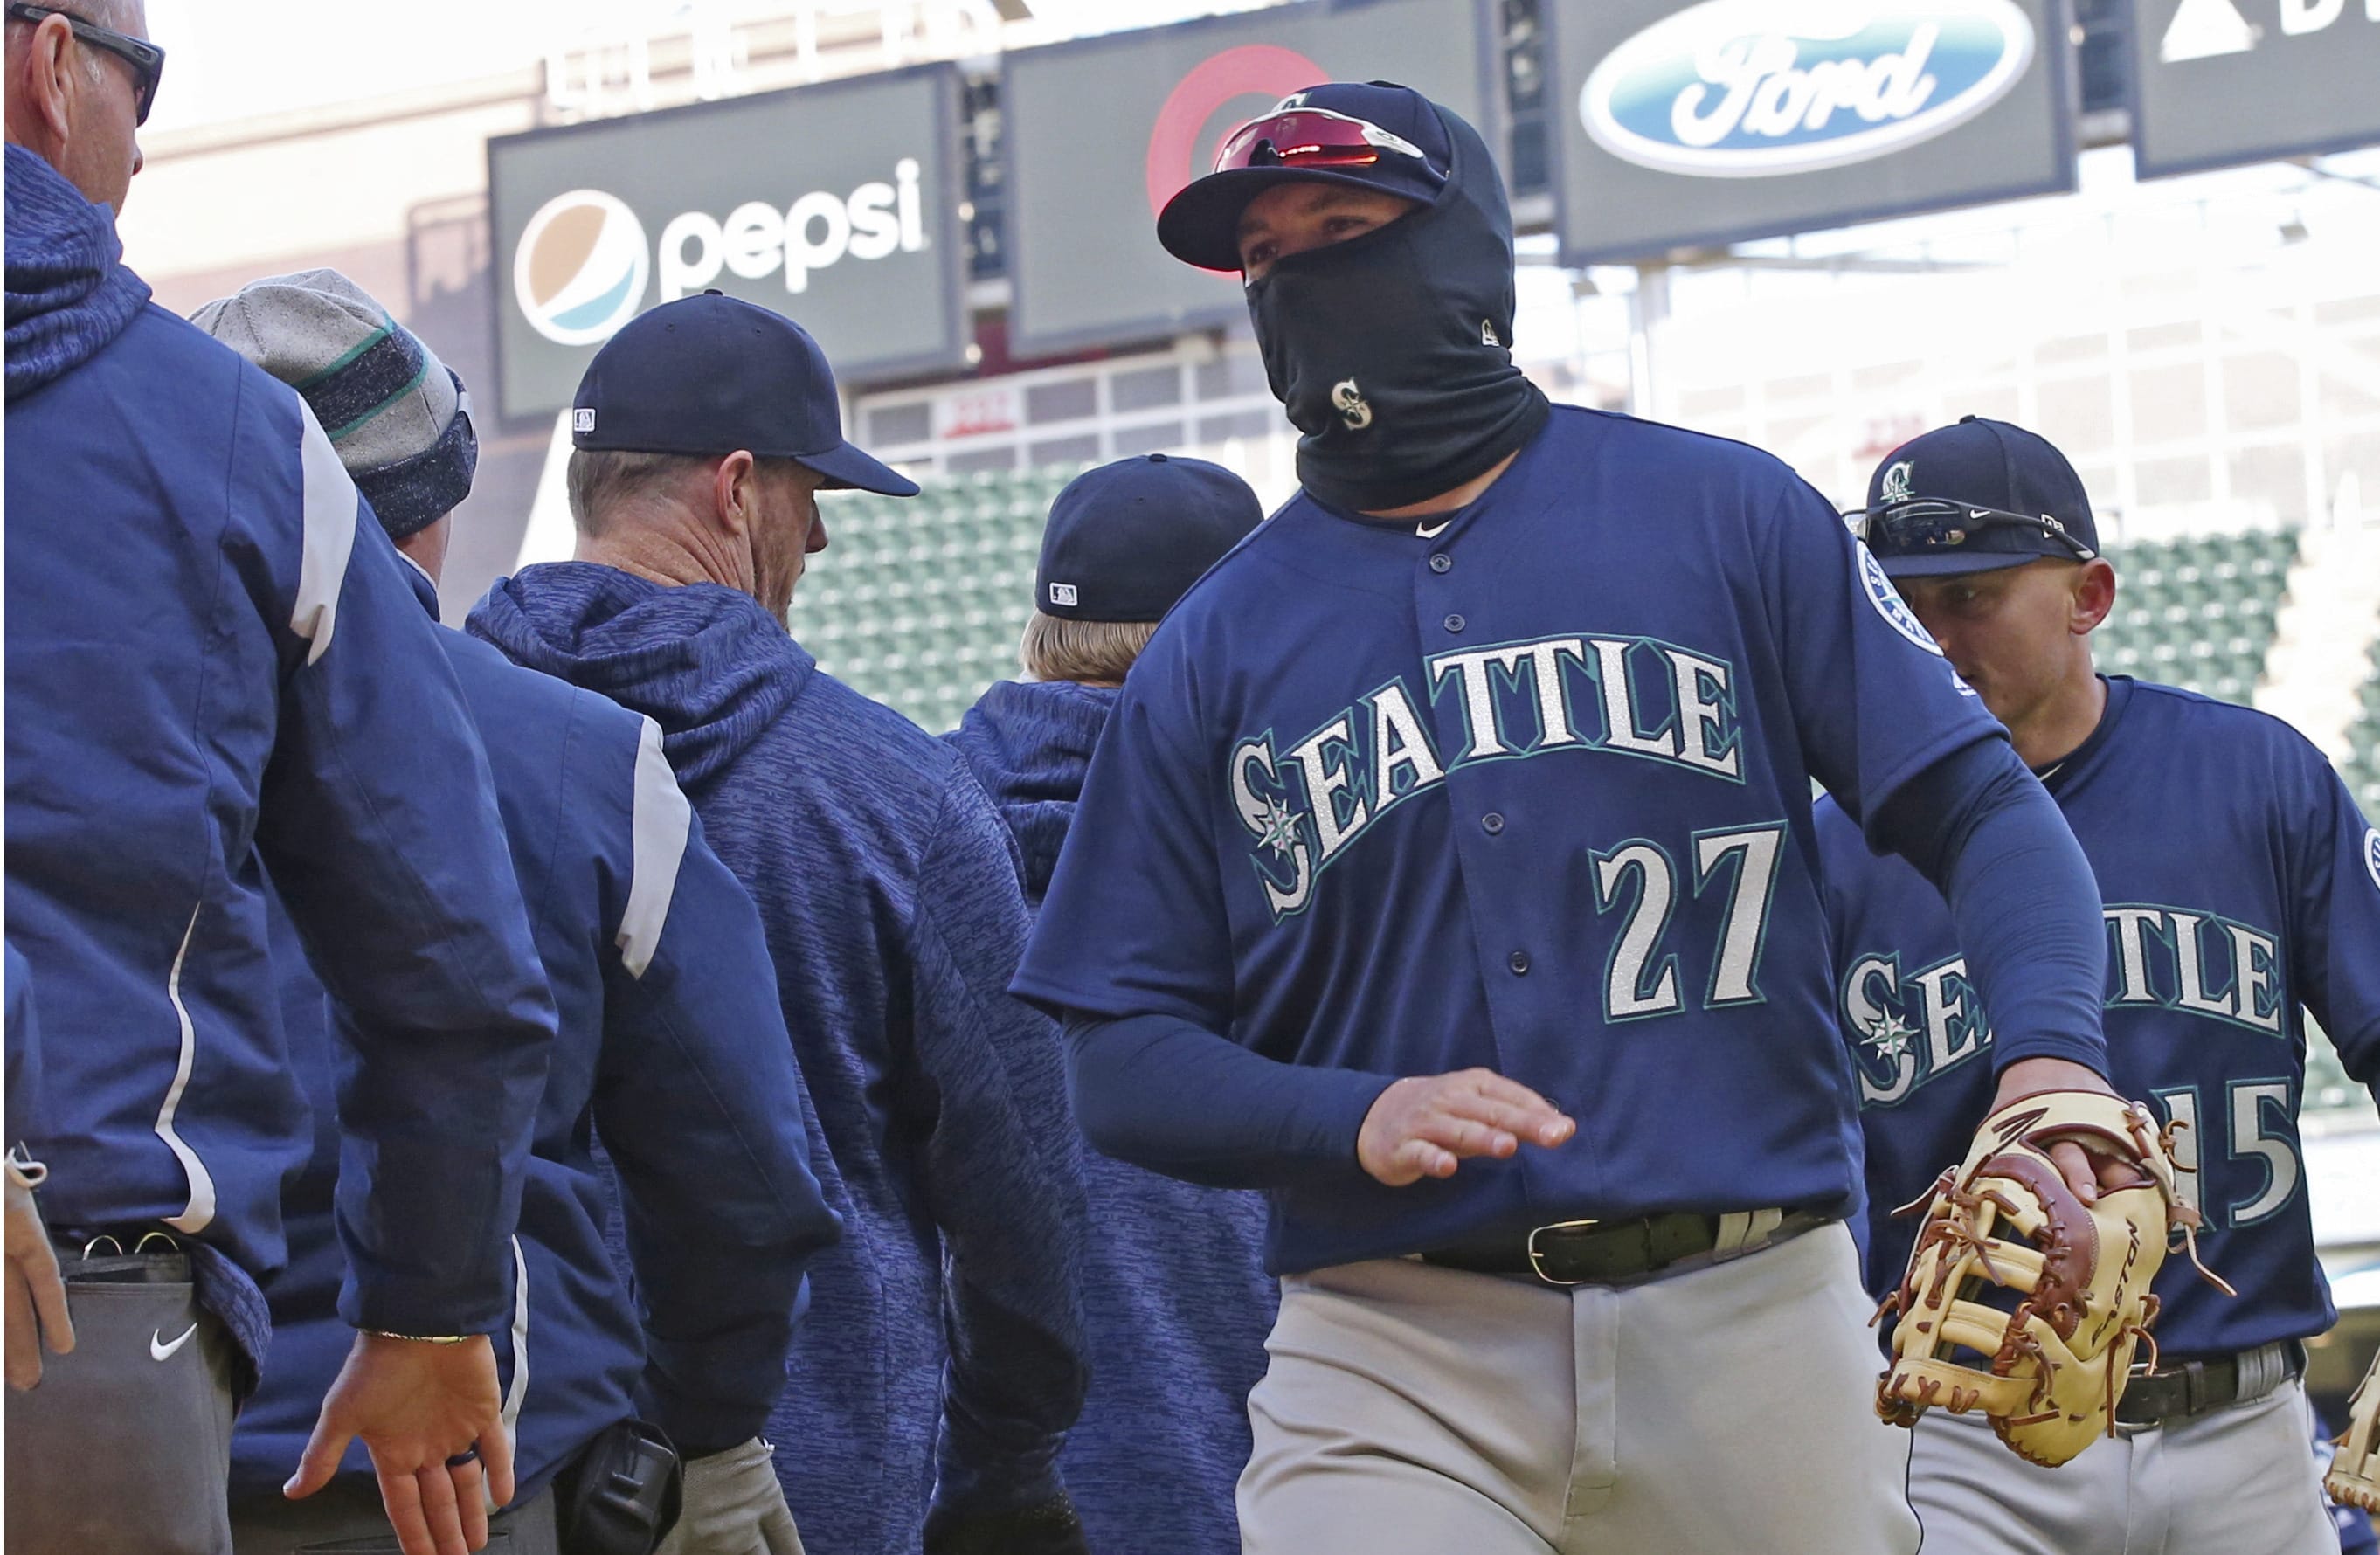 Seattle Mariners' Ryon Healy goes through the celebration line after the Mariners defeated the Minnesota Twins 11-4 in a baseball game Saturday, April 7, 2018, in Minneapolis.